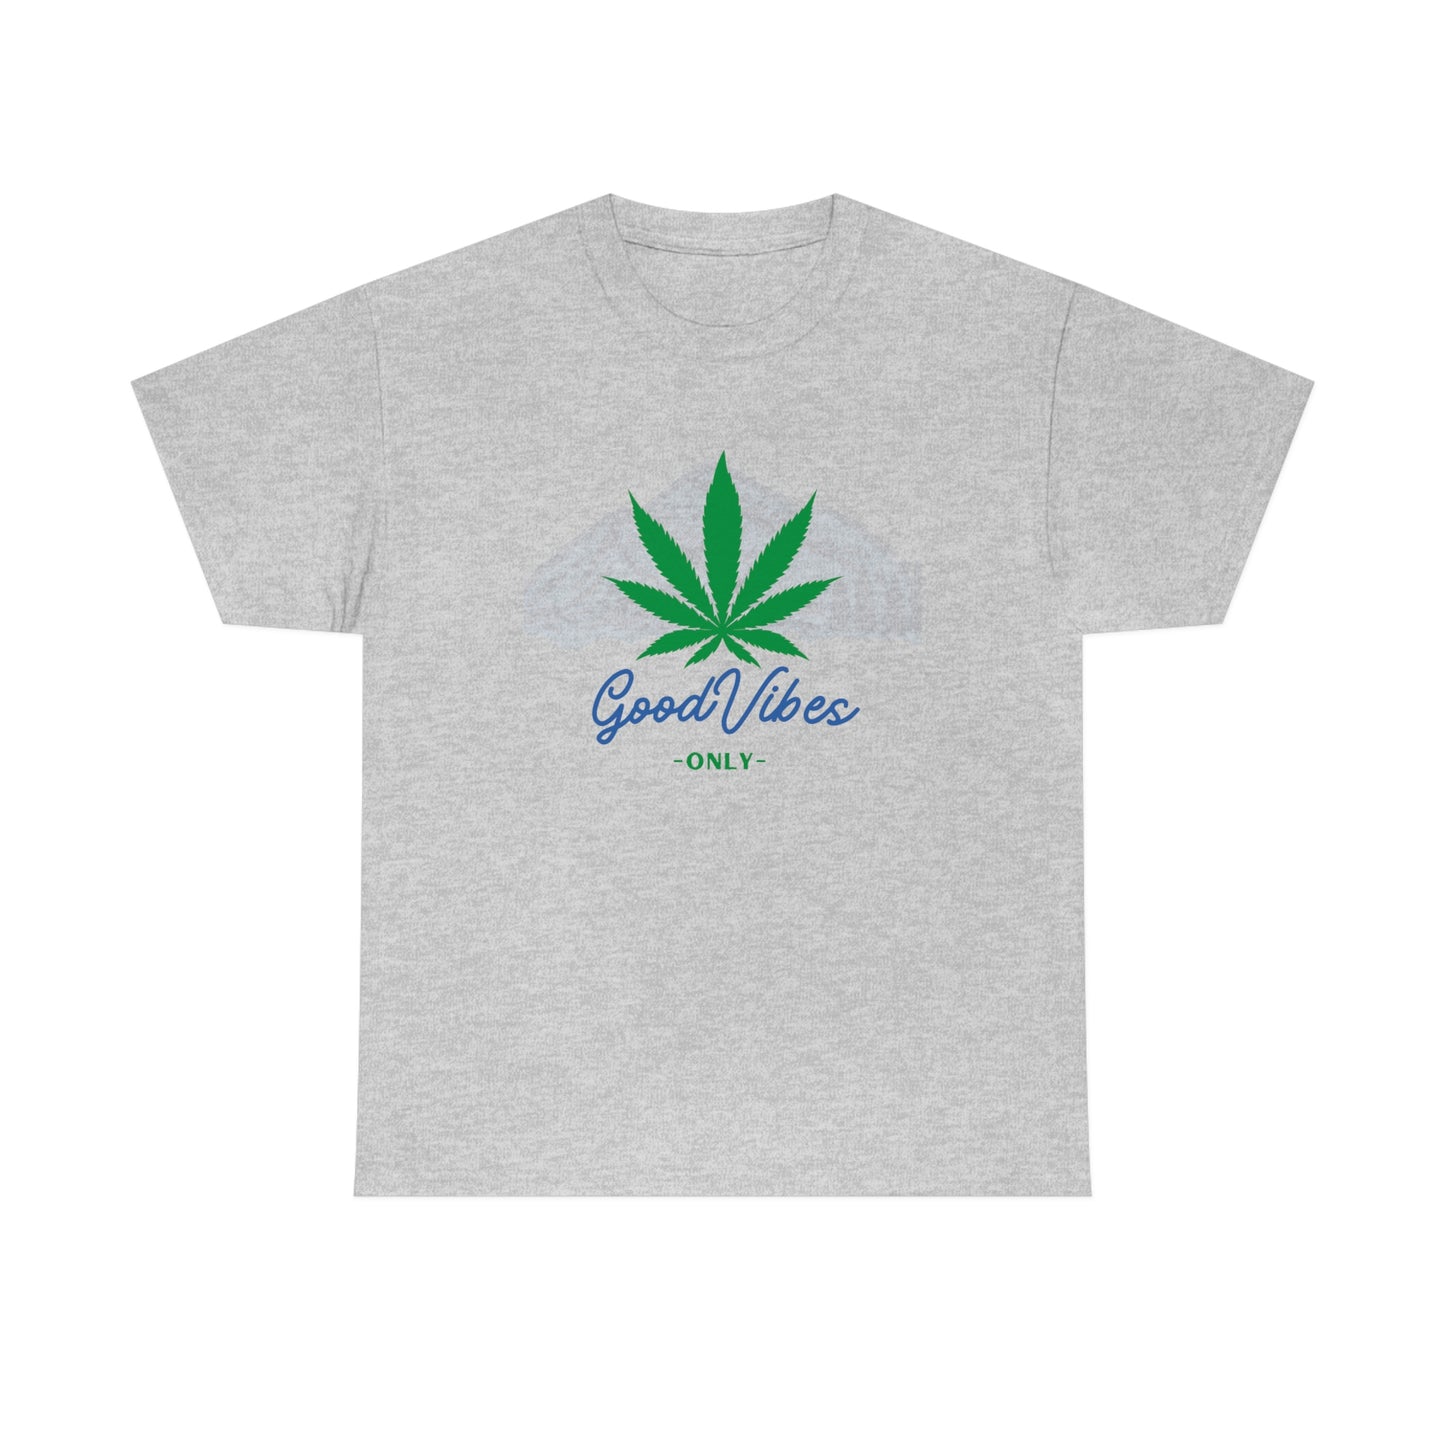 A Good Vibes Only Mountain Tee with the word good vibes on it.